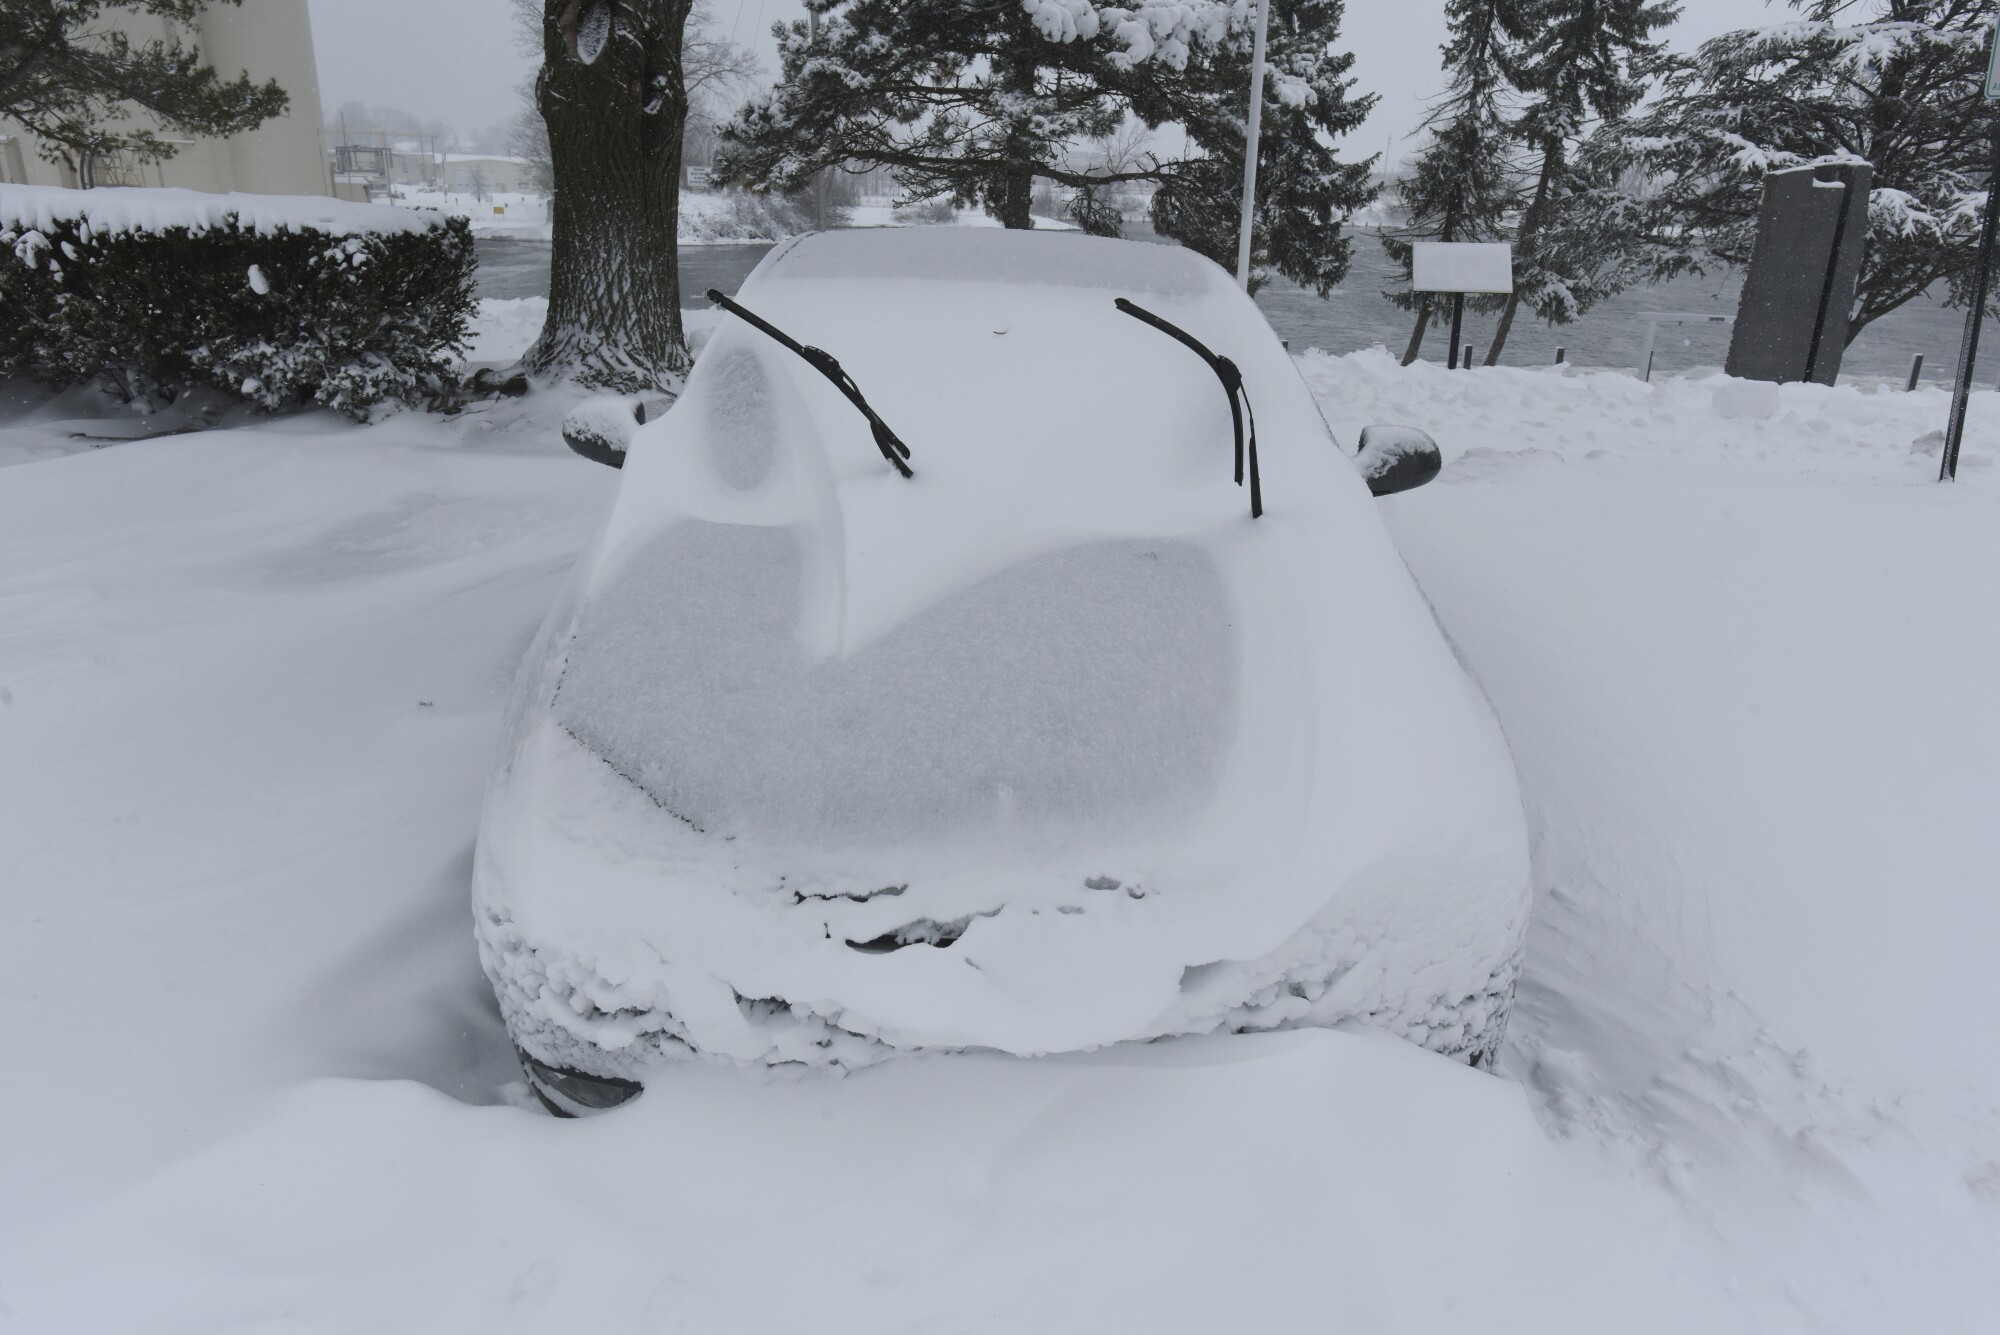 A car is buried under several inches of snow